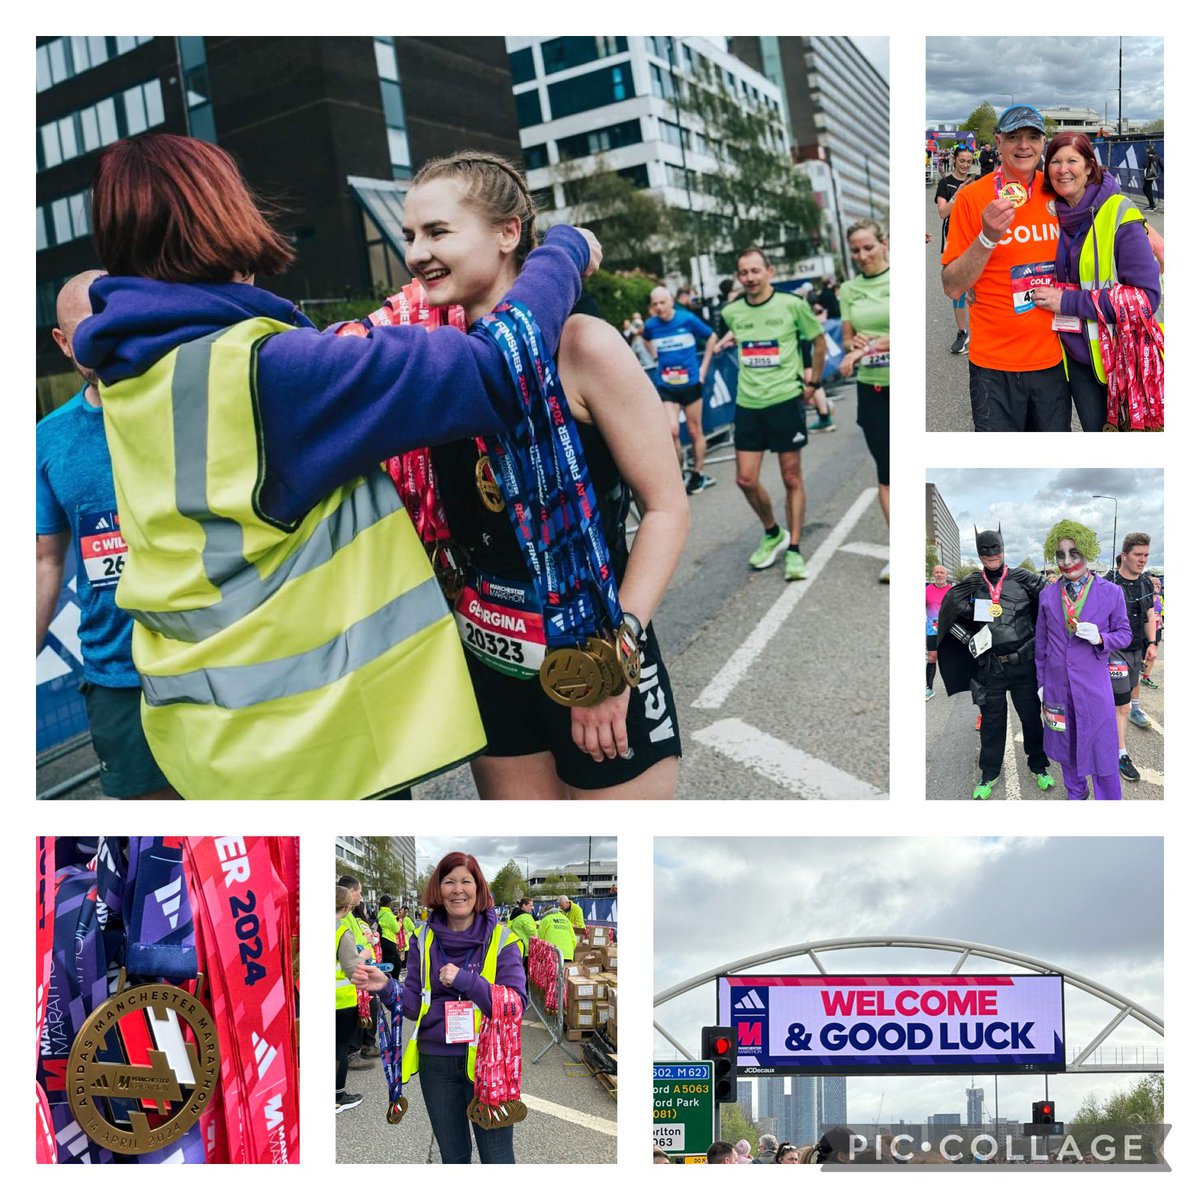 Yesterday I had one of the most privileged & humbling experiences @Marathon_Mcr even though I couldn’t run it .. I got to hand out medals to the finishers .. including my hubby .. so many emotions shared #NHS1000miles